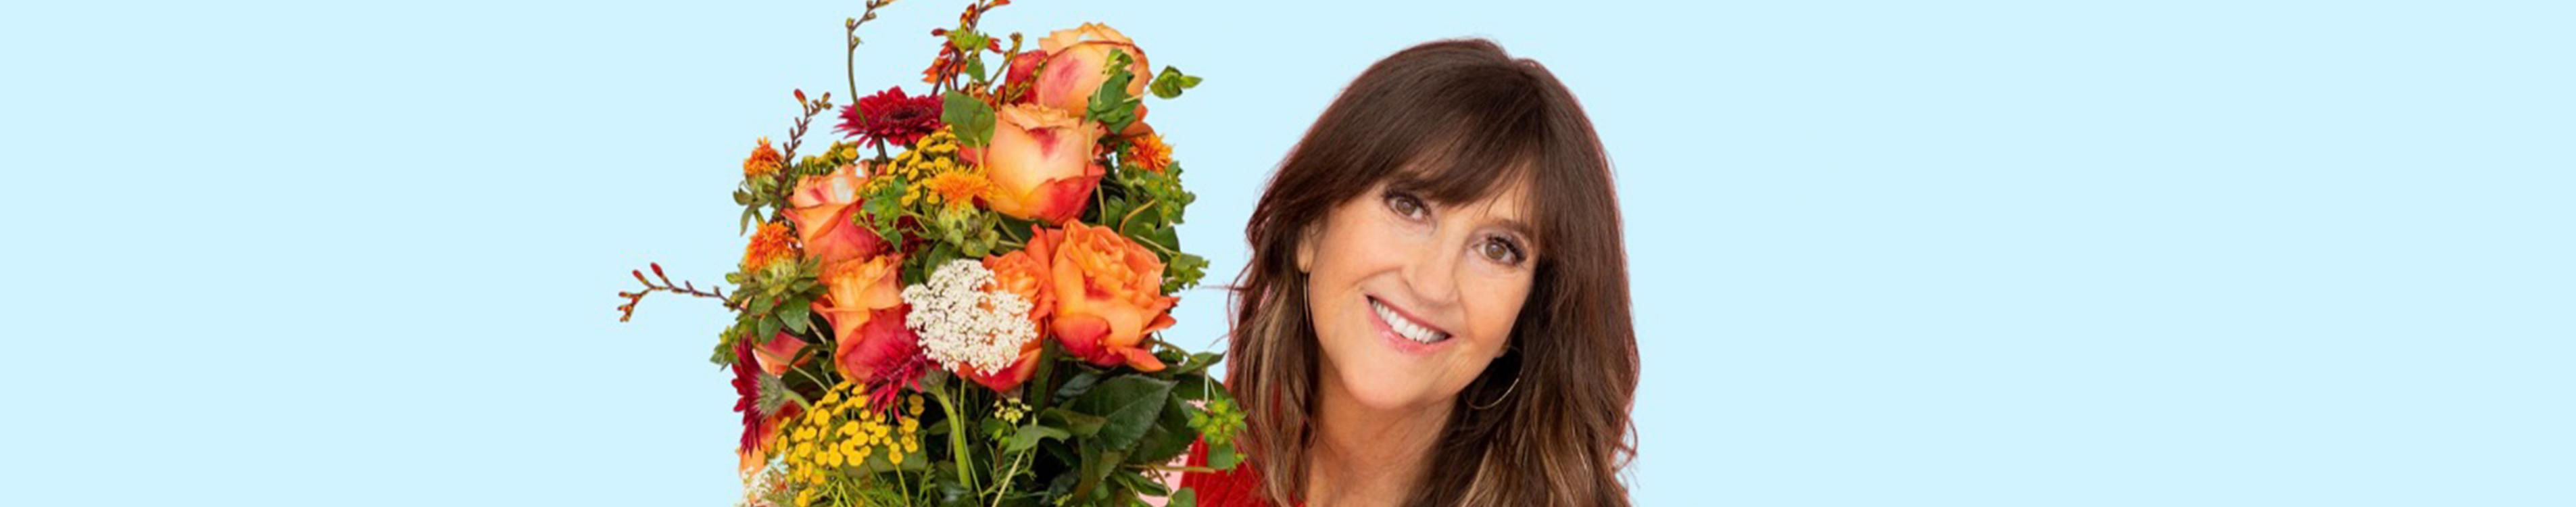 Author Jennifer Cramer-Miller looks at the camera and smiles while holding a bouquet of flowers.